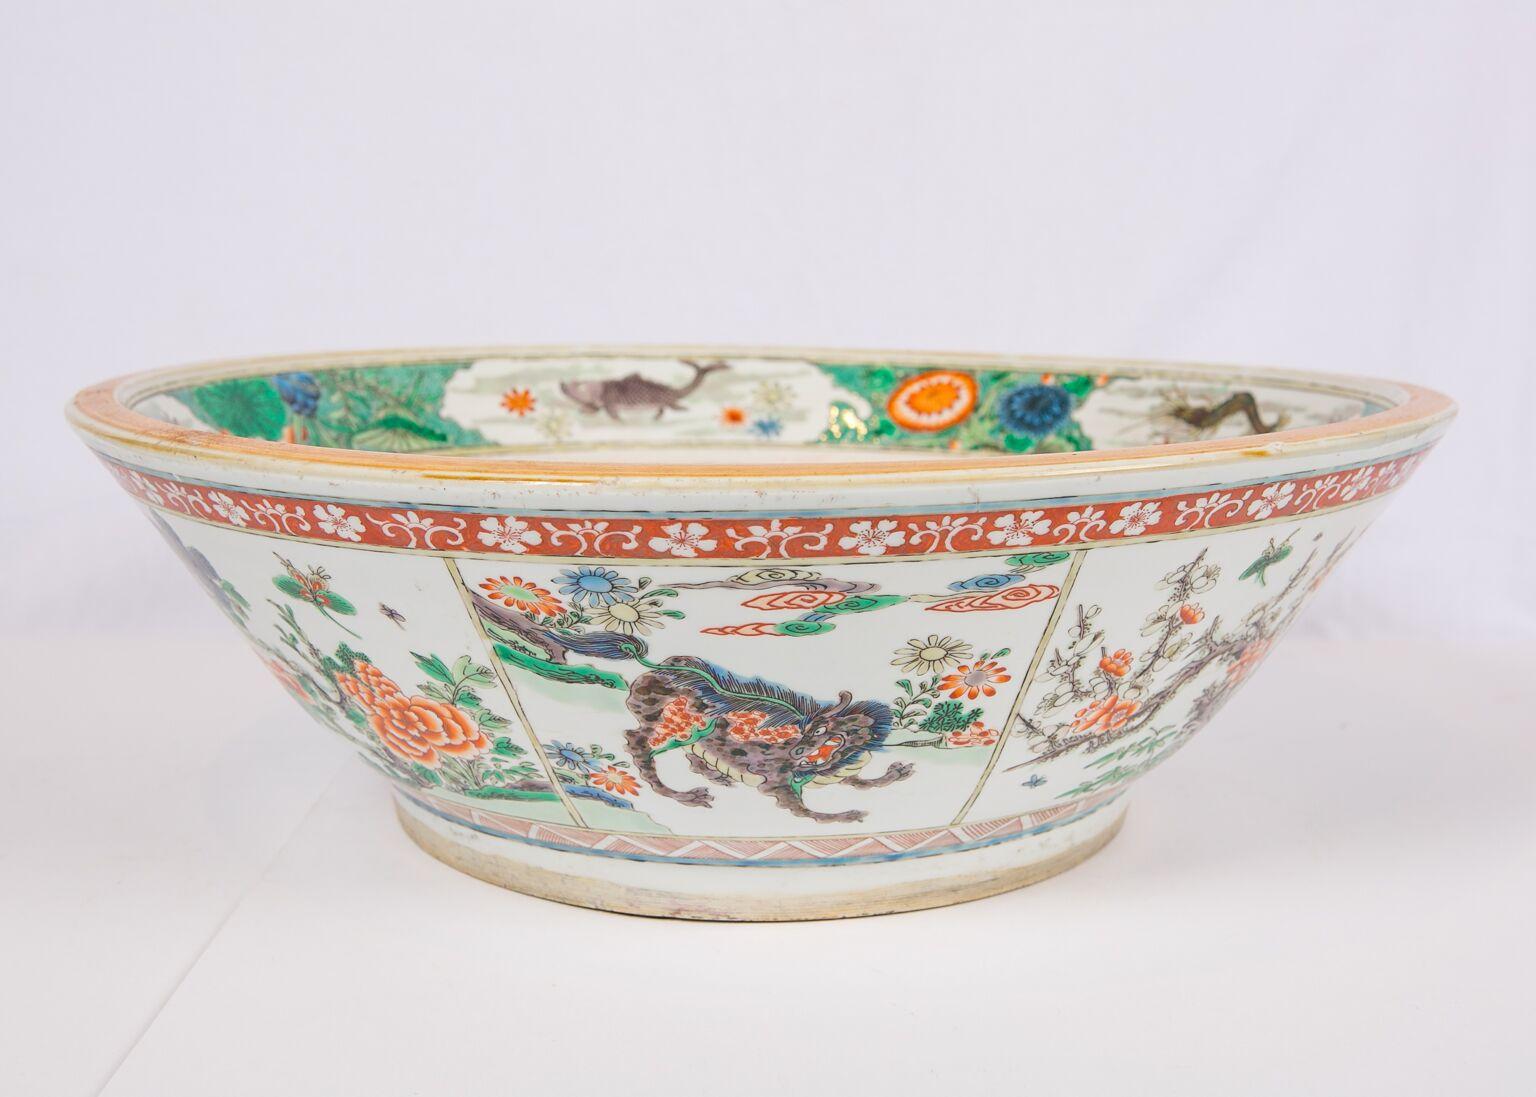 Large Antique Chinese Bowl Decorated in Famille Verte Enamels, Circa 1900 1